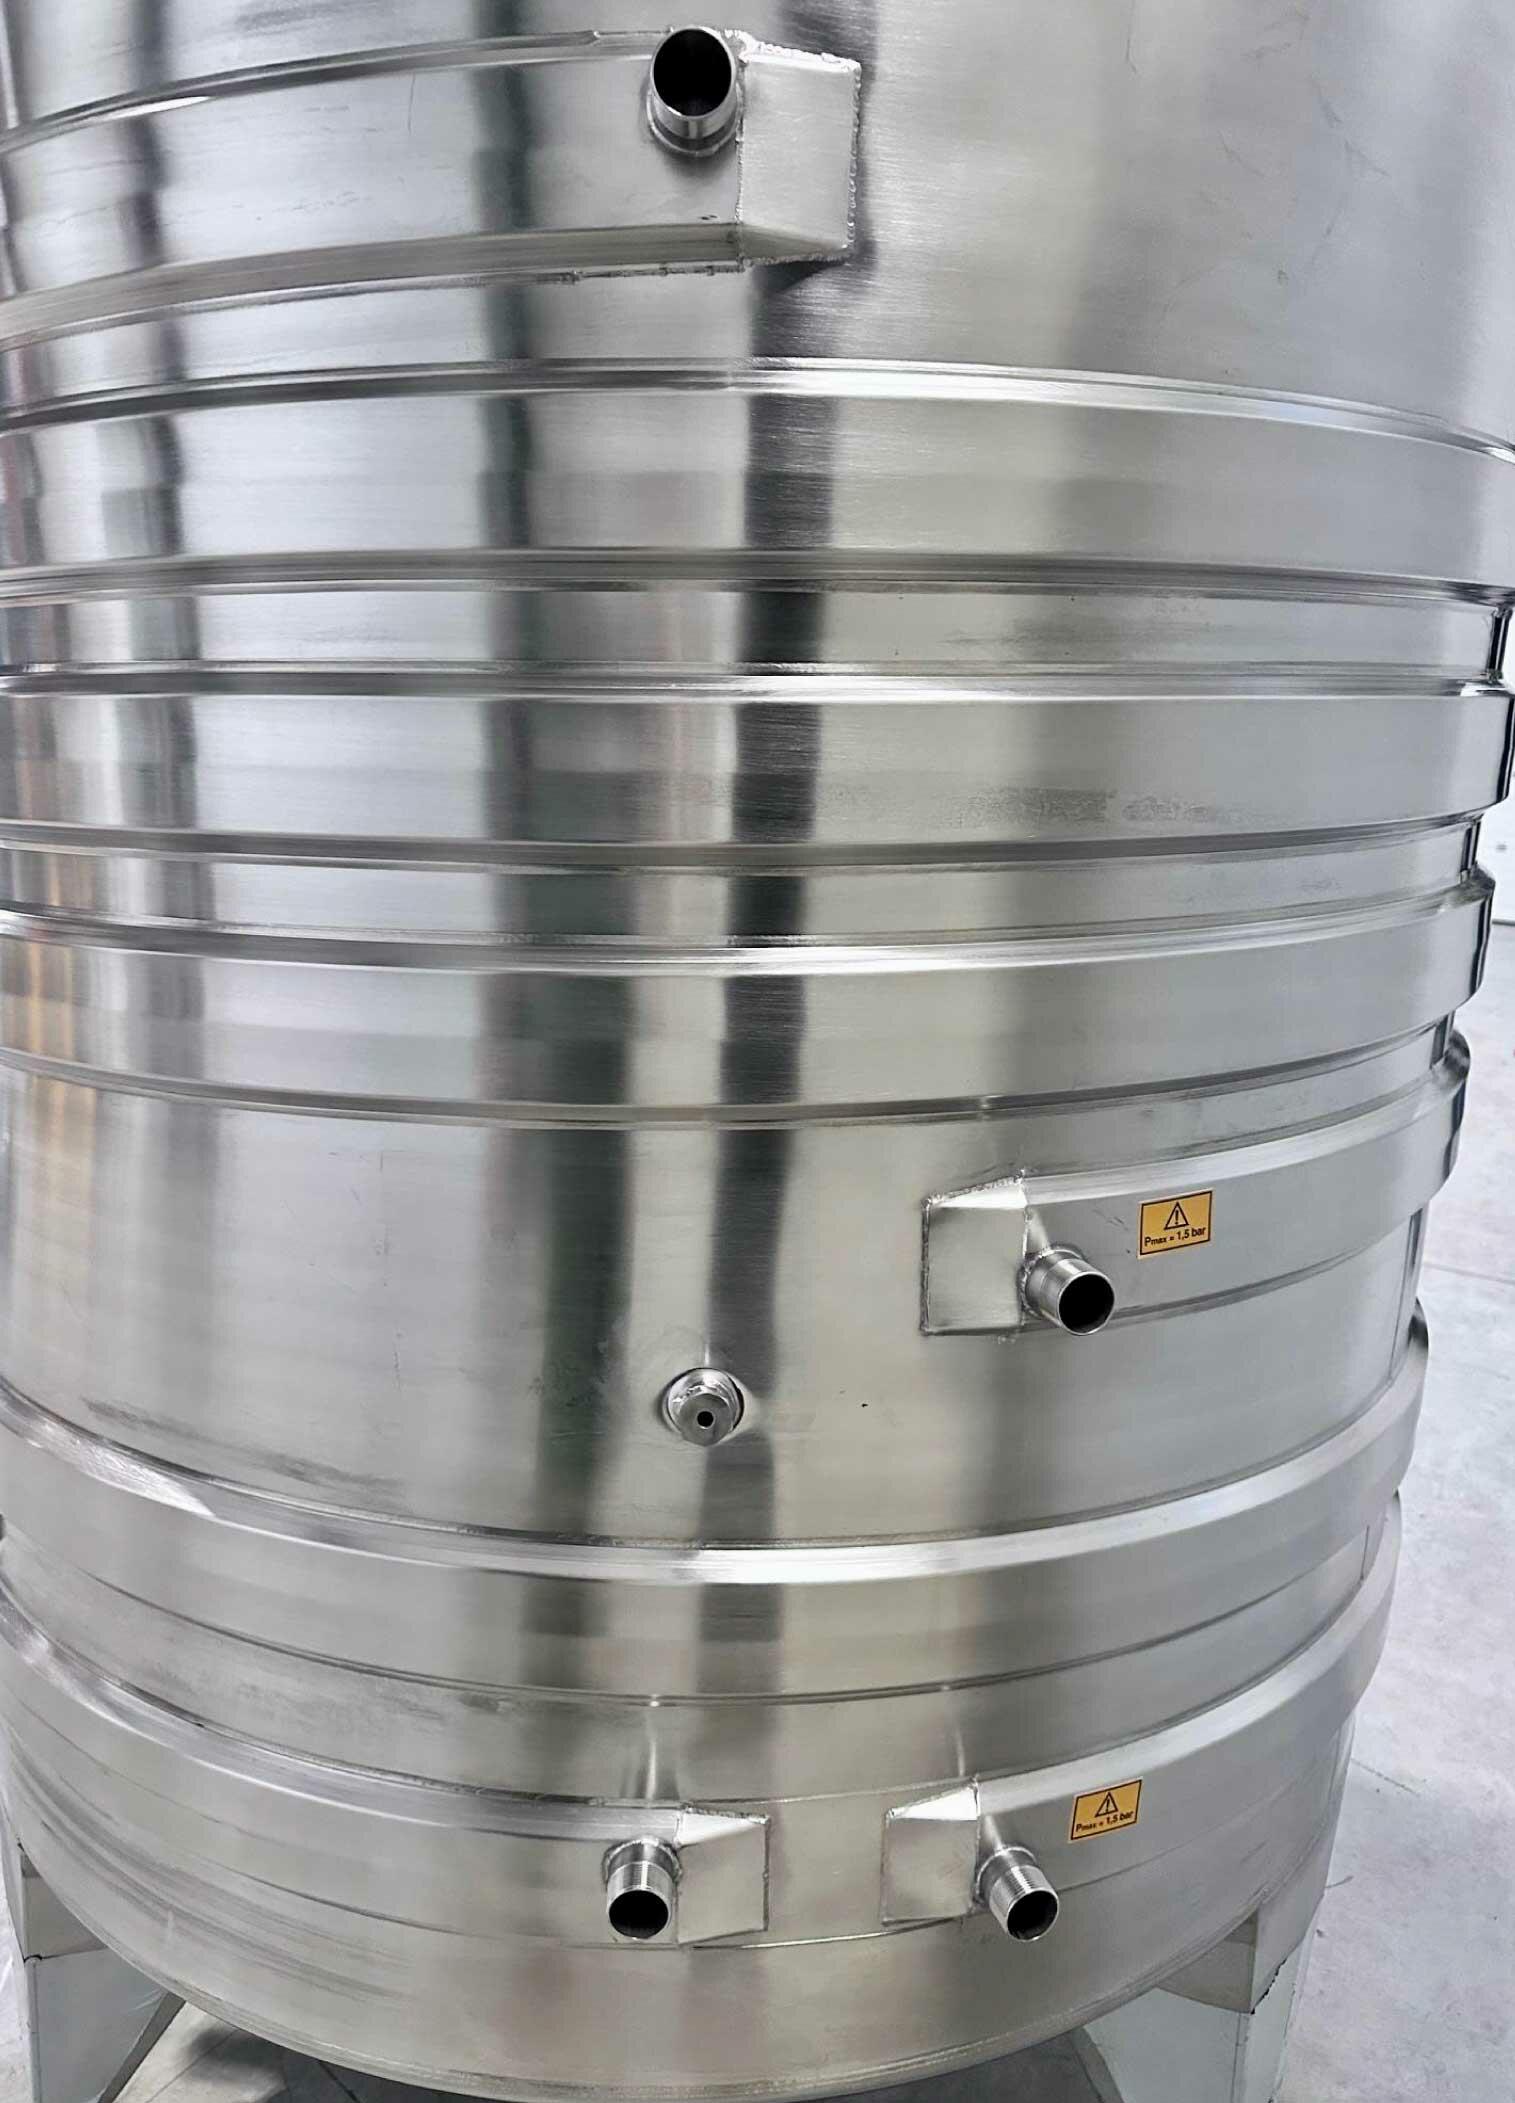 304 stainless steel tank - Cooling coll - SPAIPSER4000